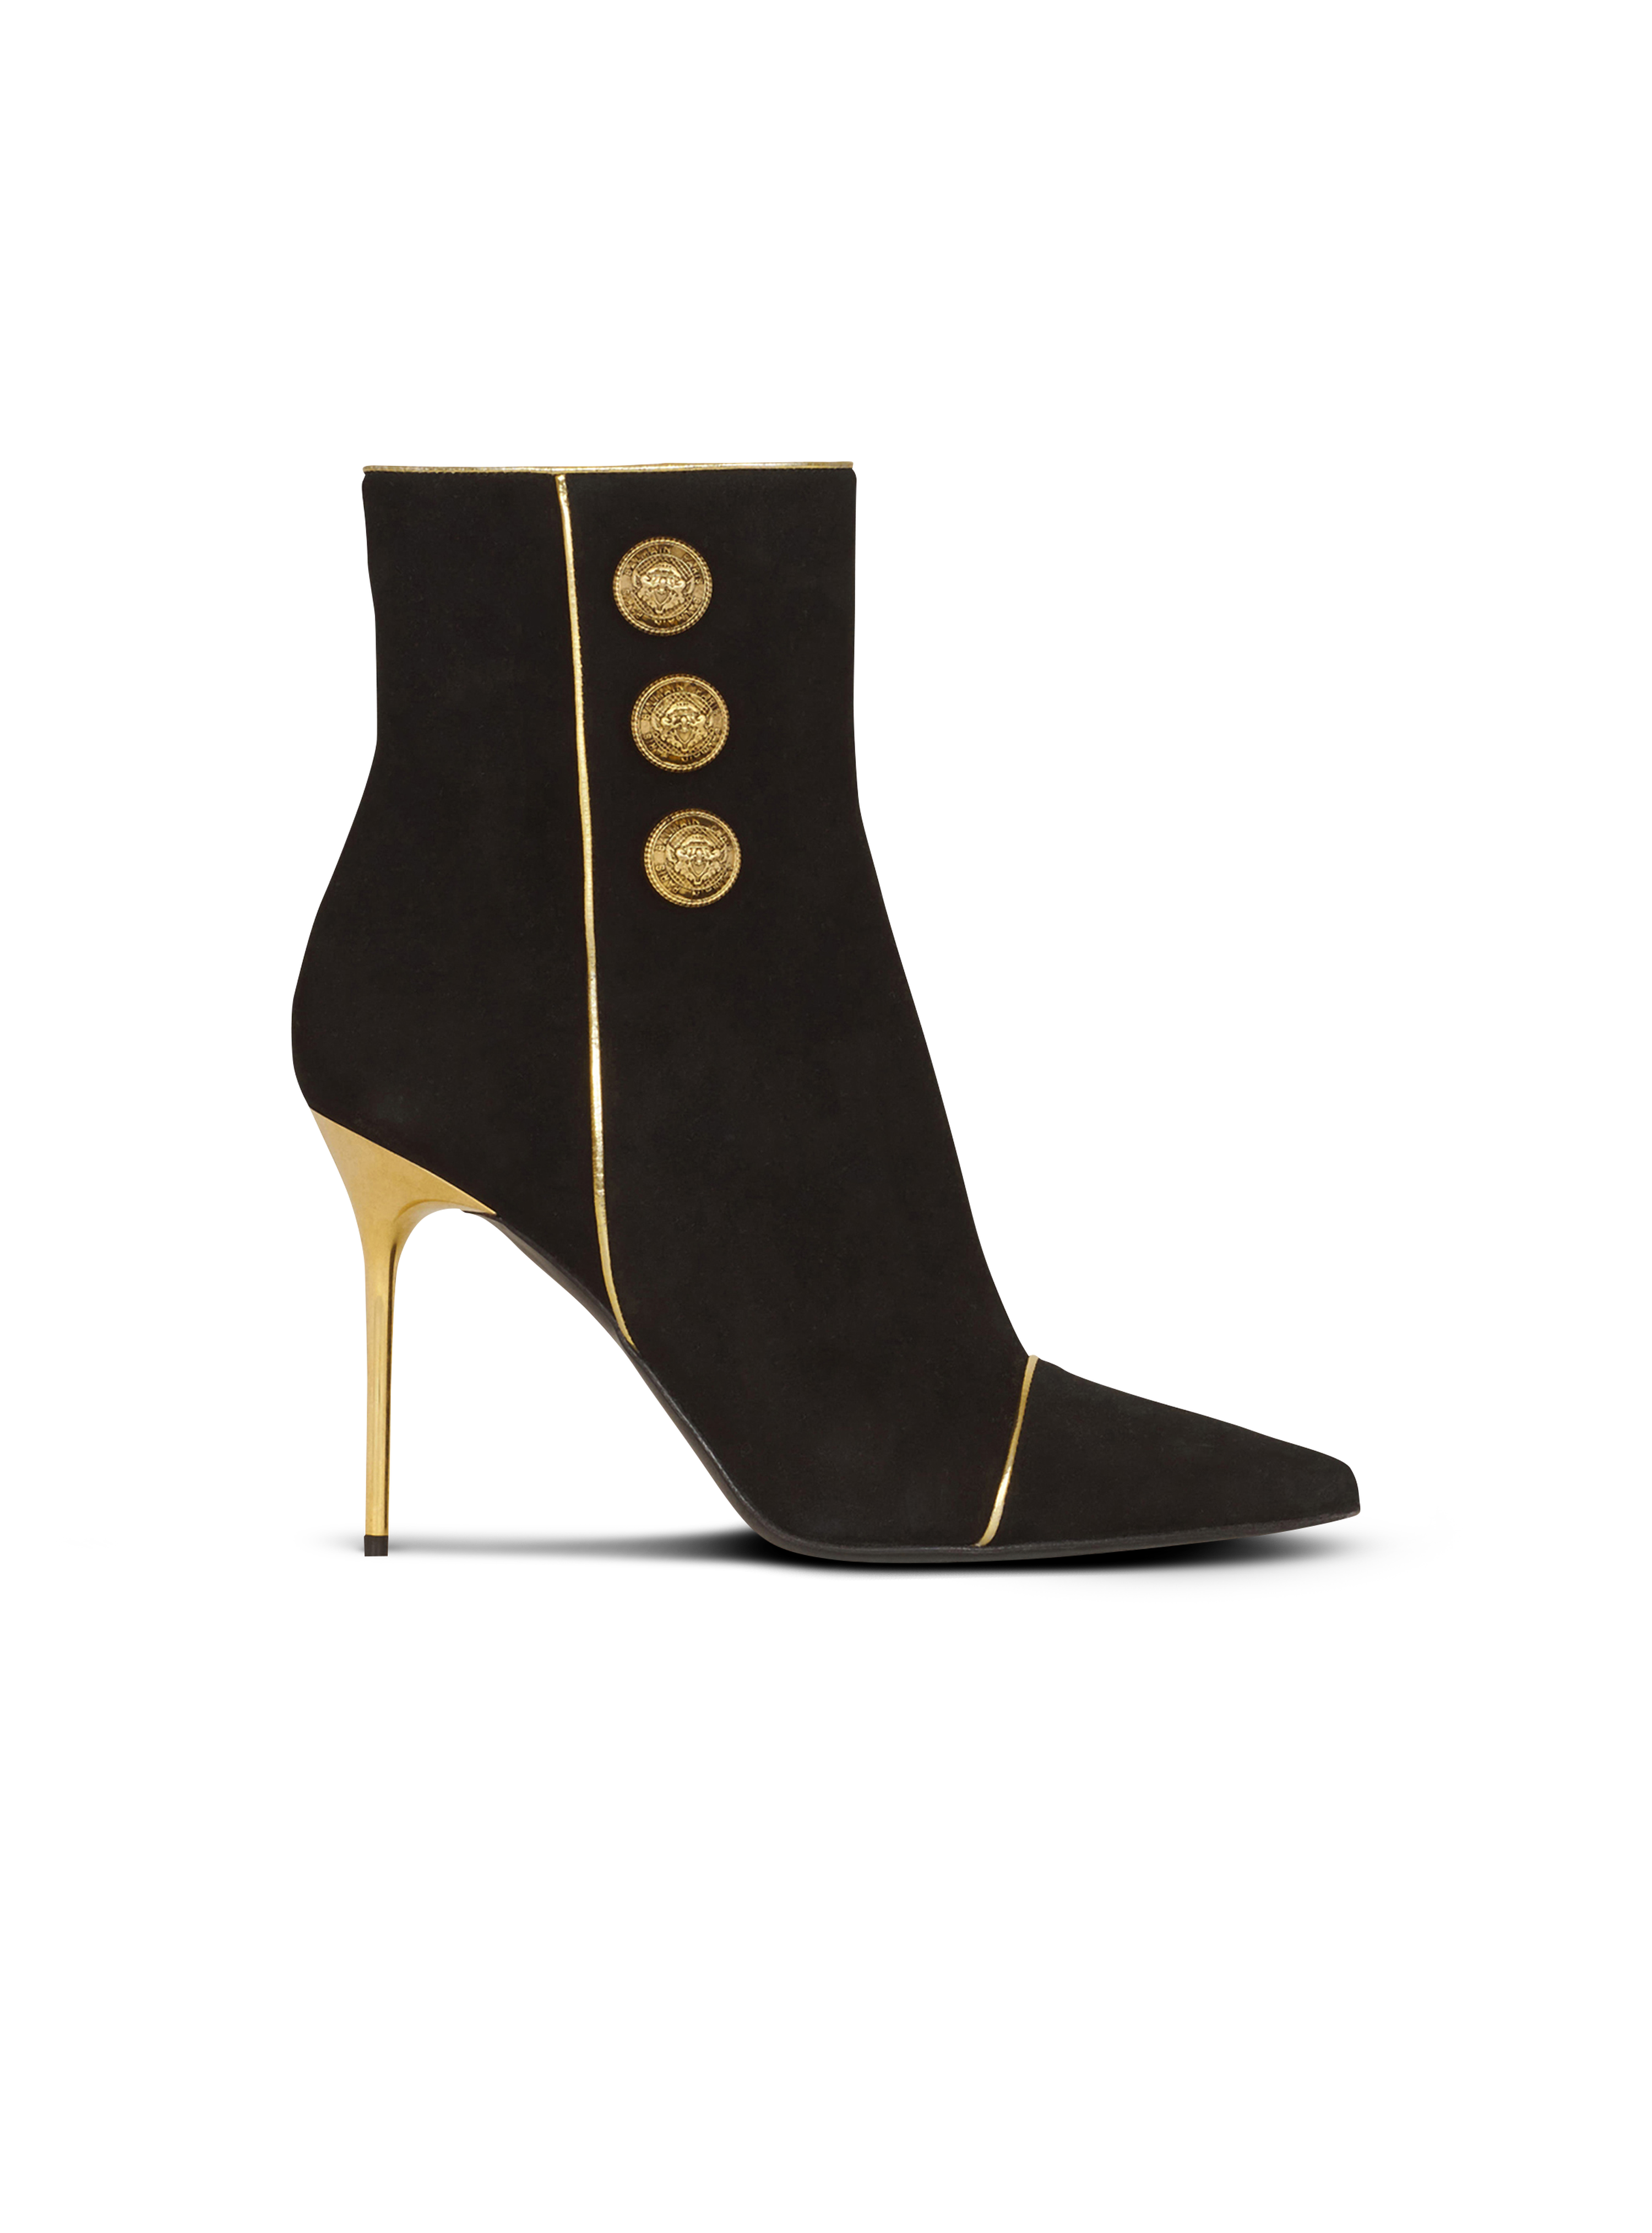 Suede Roni ankle boots, black